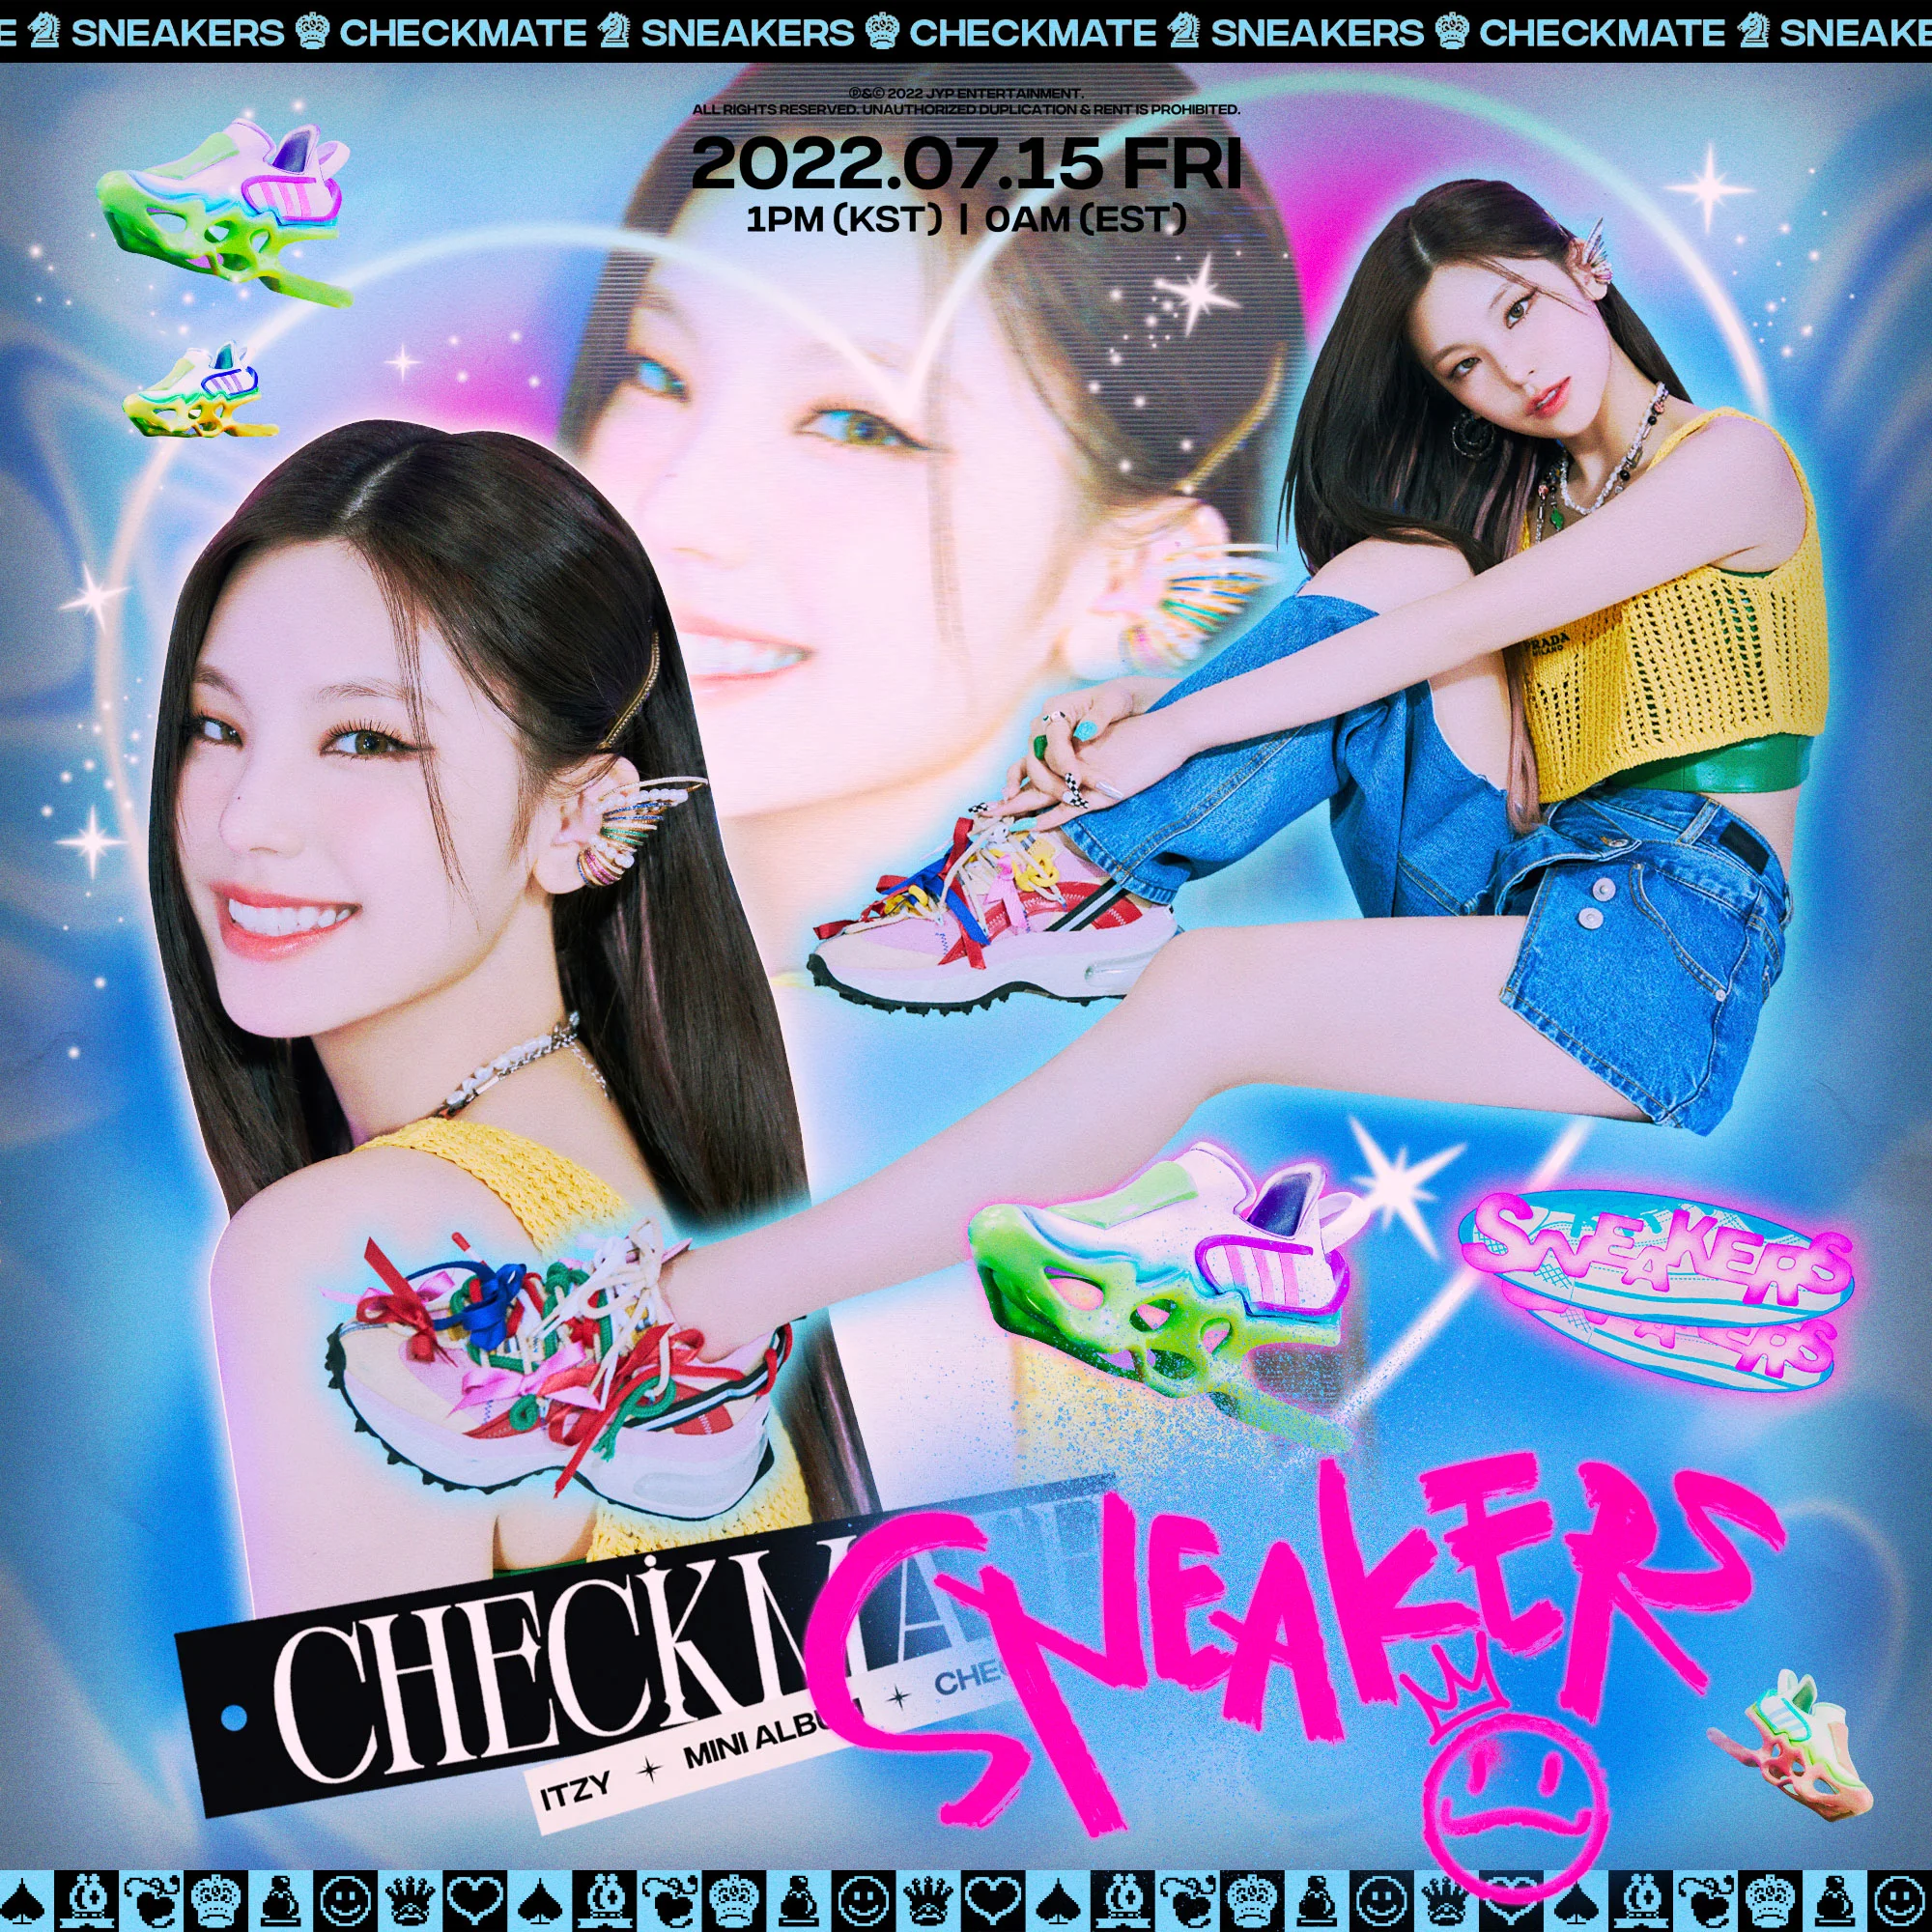 Itzy Checkmate Yeji Concept Teaser Picture Image Photo Kpop K-Concept 3